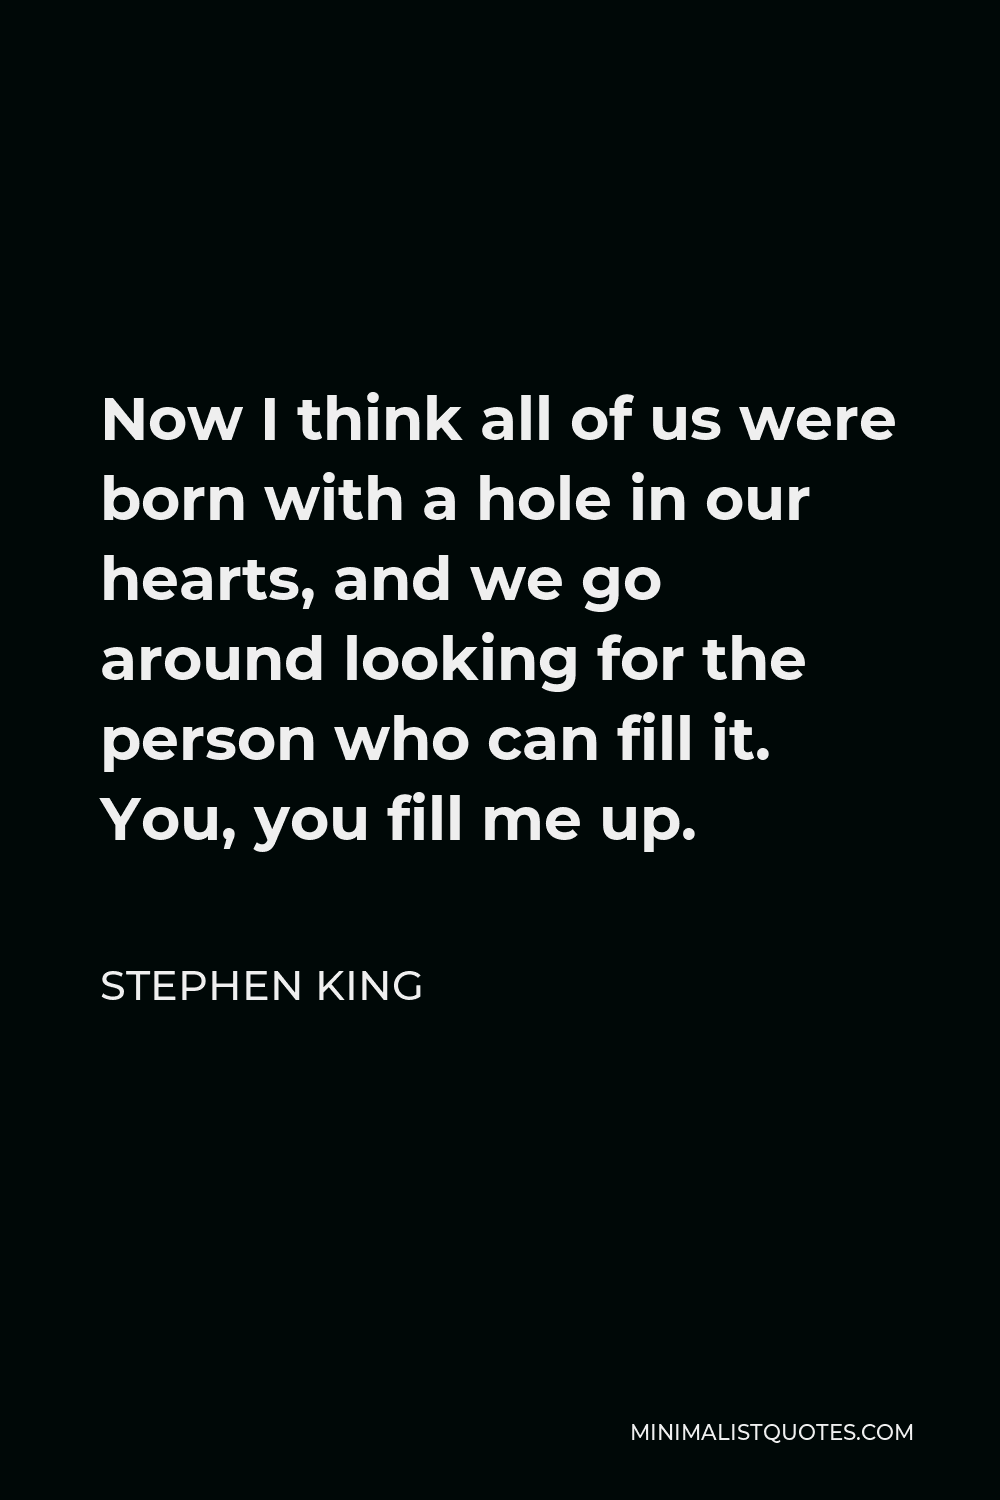 Stephen King Quote - Now I think all of us were born with a hole in our hearts, and we go around looking for the person who can fill it. You, you fill me up.